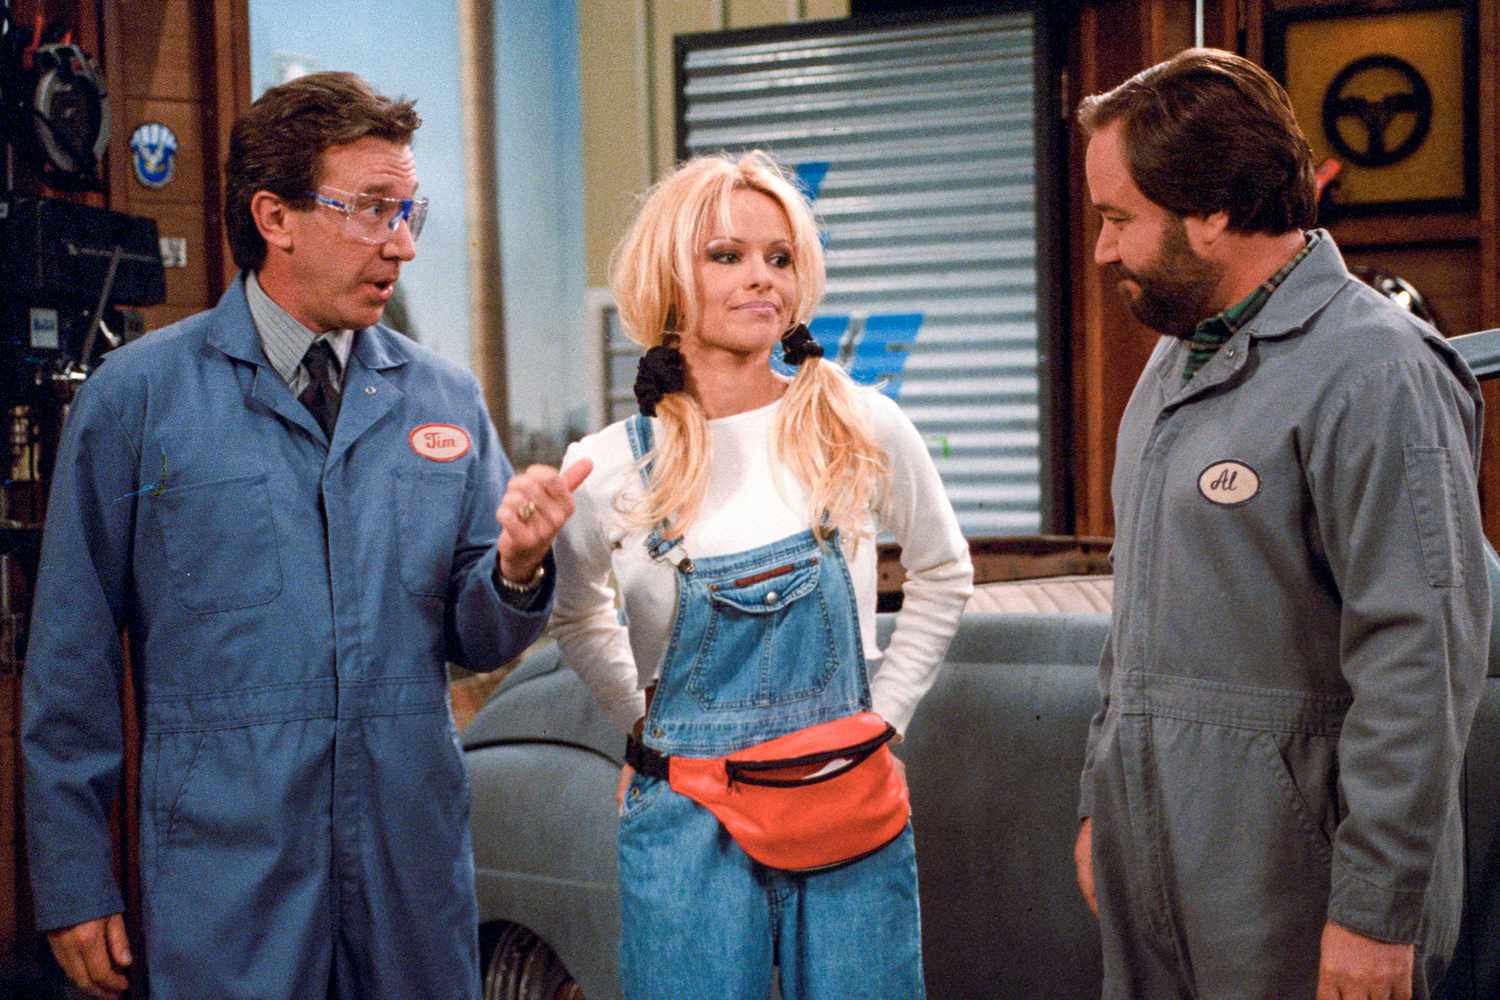 Tim Allen claims ABC disappointed by Pamela Anderson flashing story ...